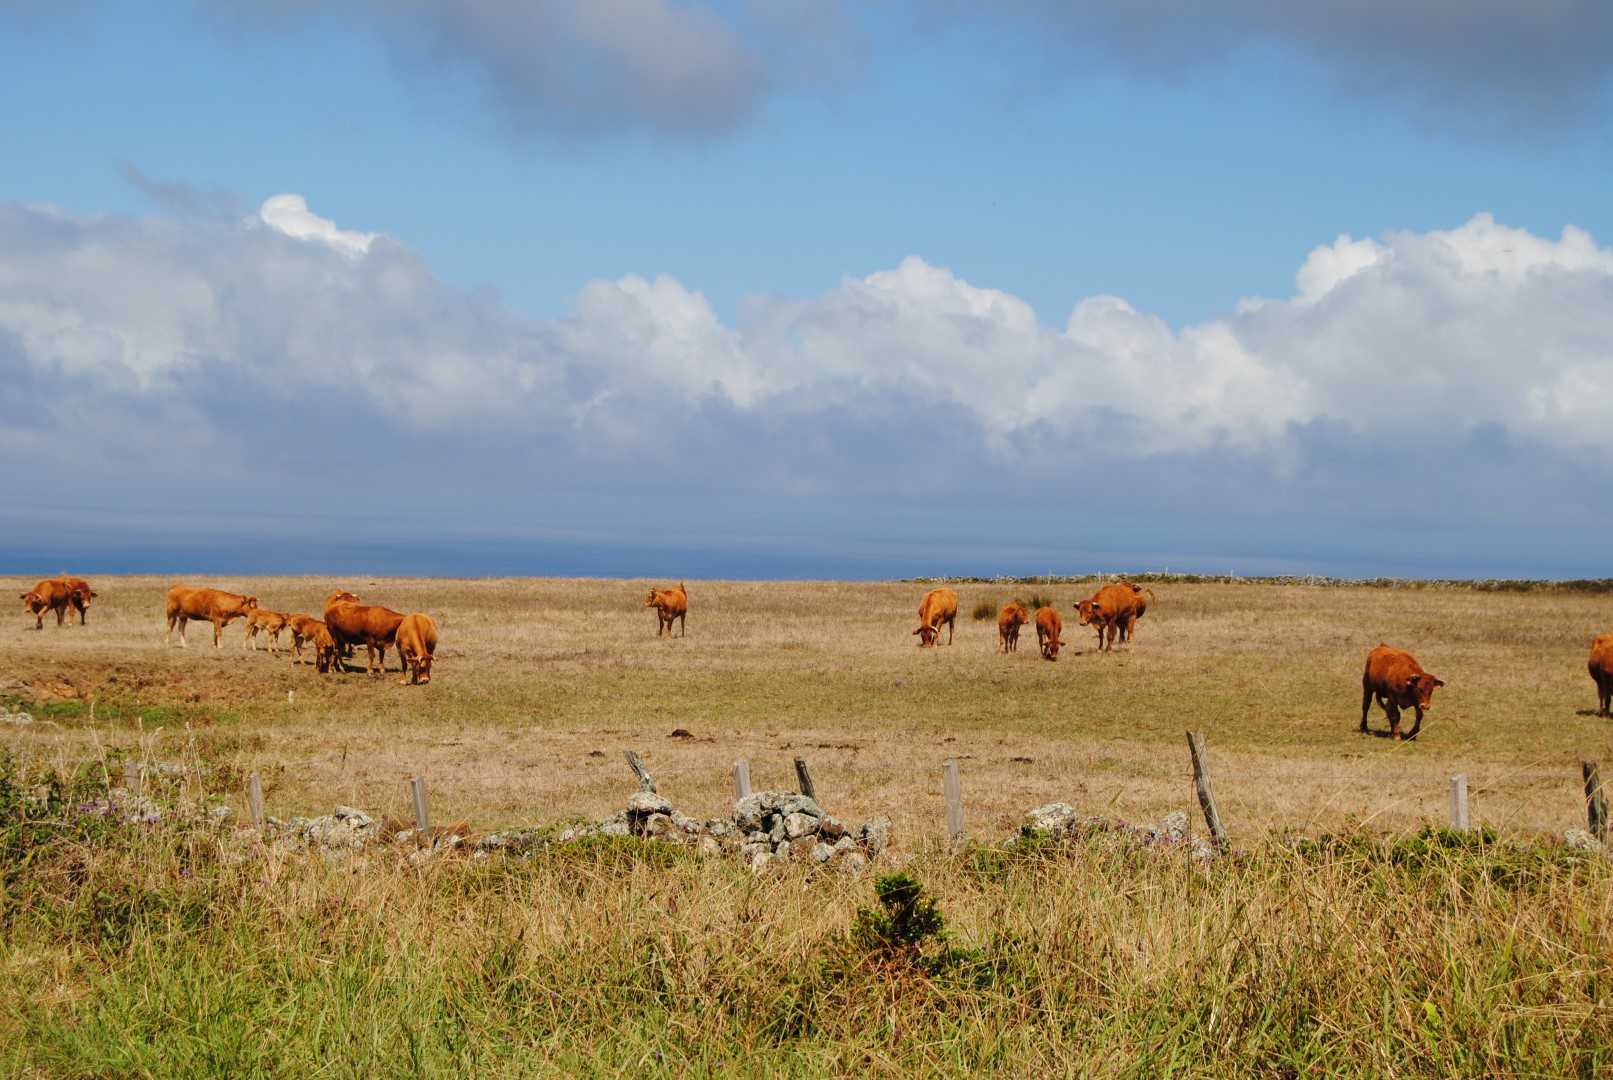 Pasture & Cows on the South side of Santa Maria island